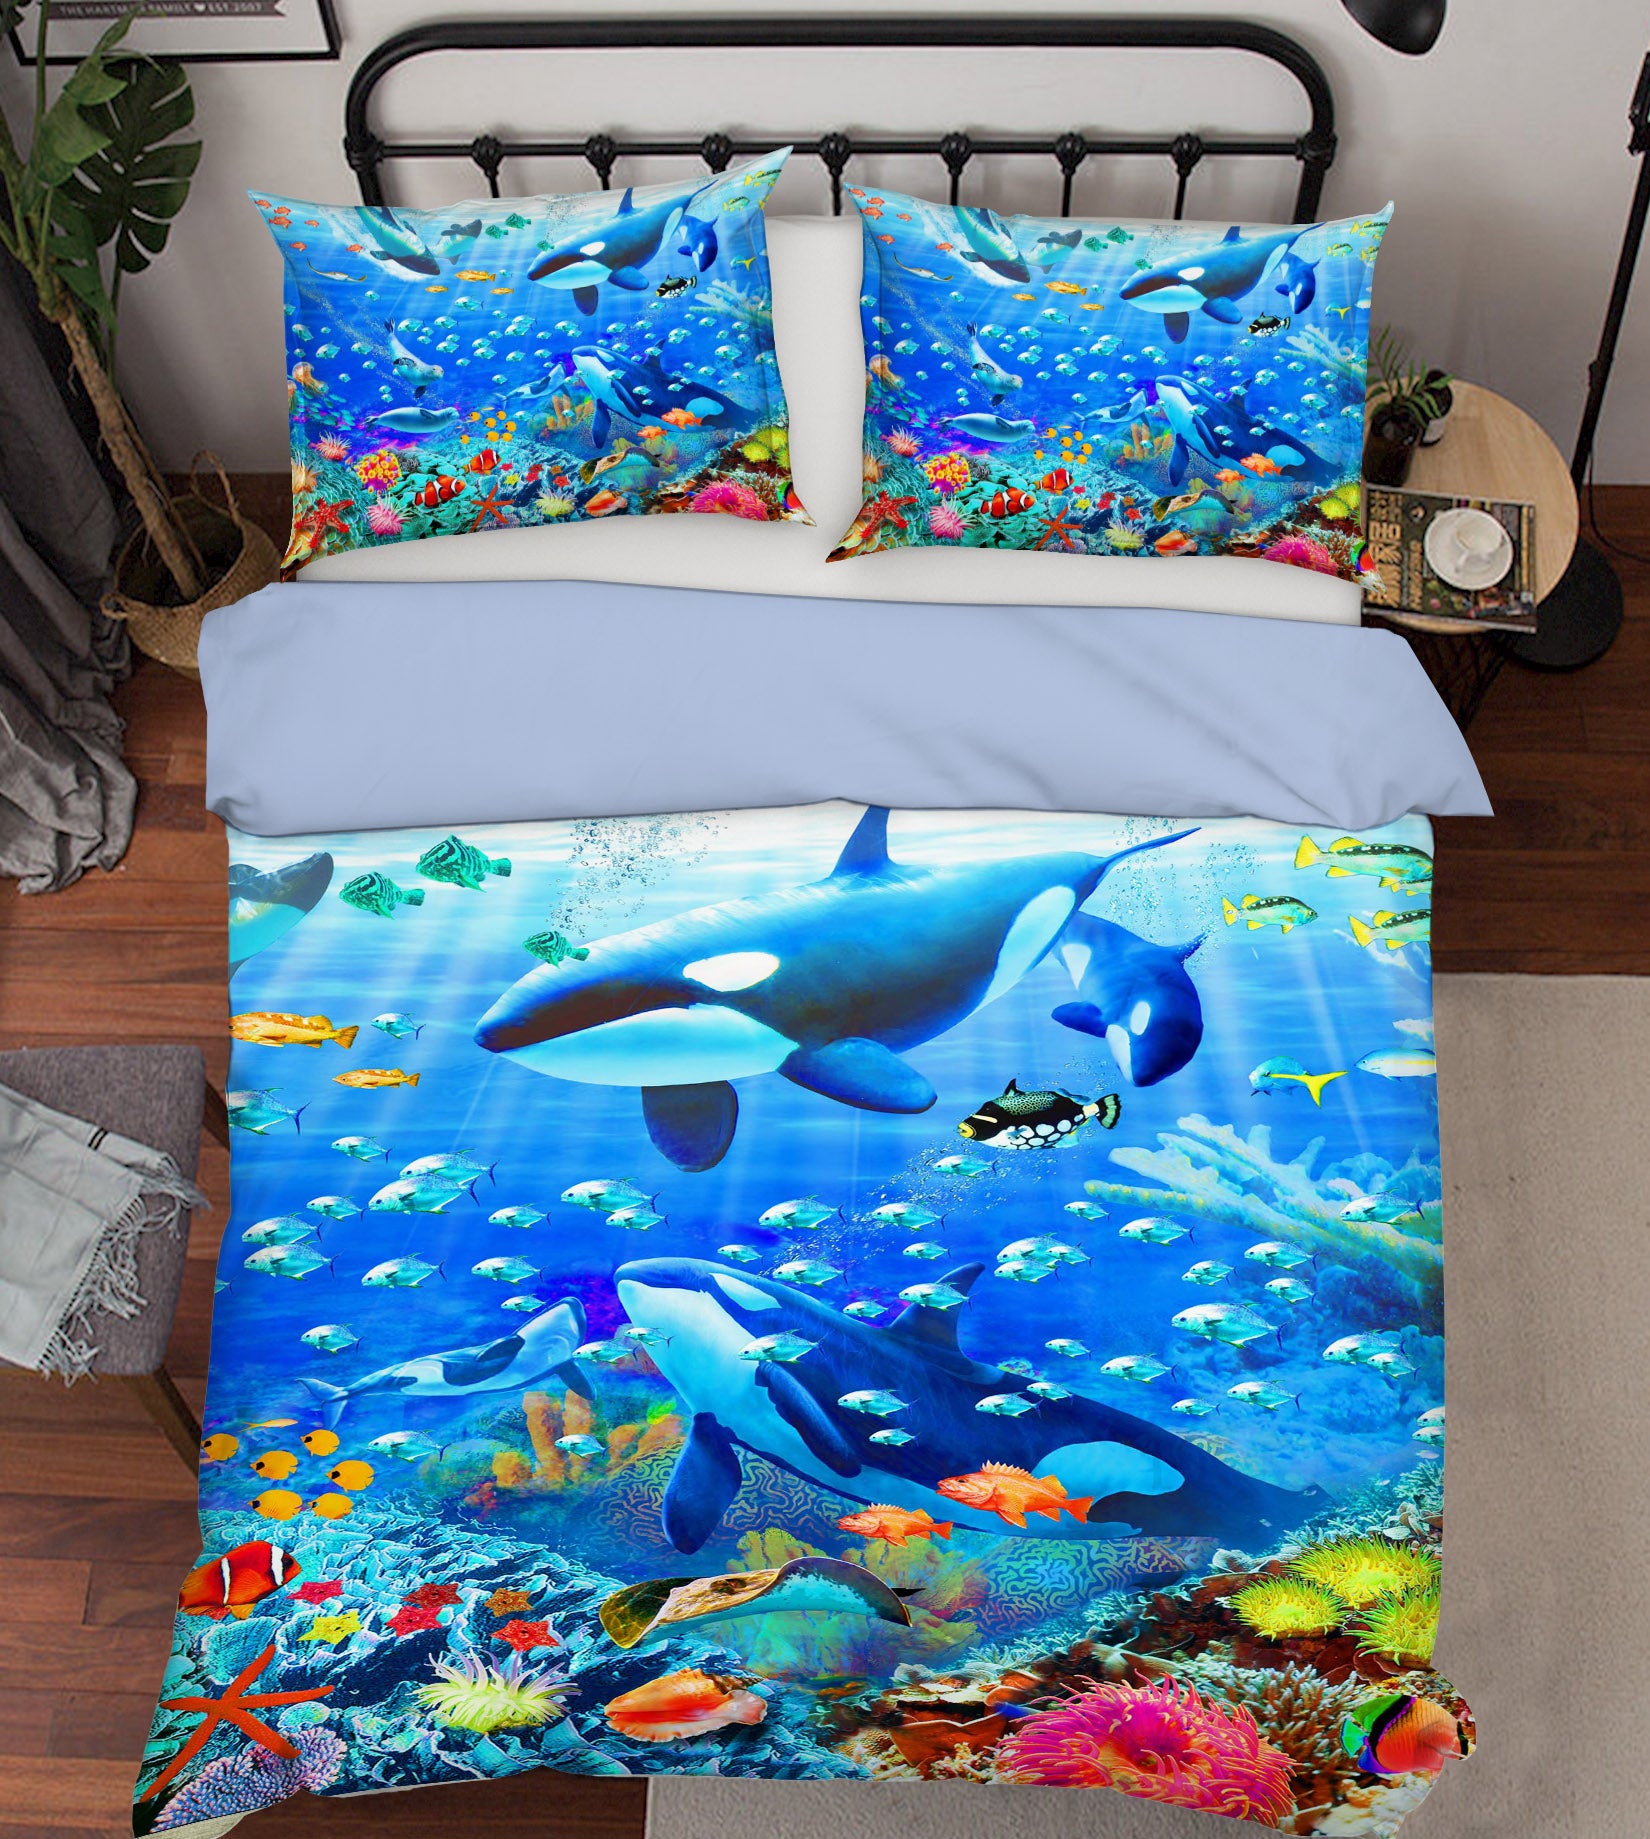 3D Blue Whale 2032 Adrian Chesterman Bedding Bed Pillowcases Quilt